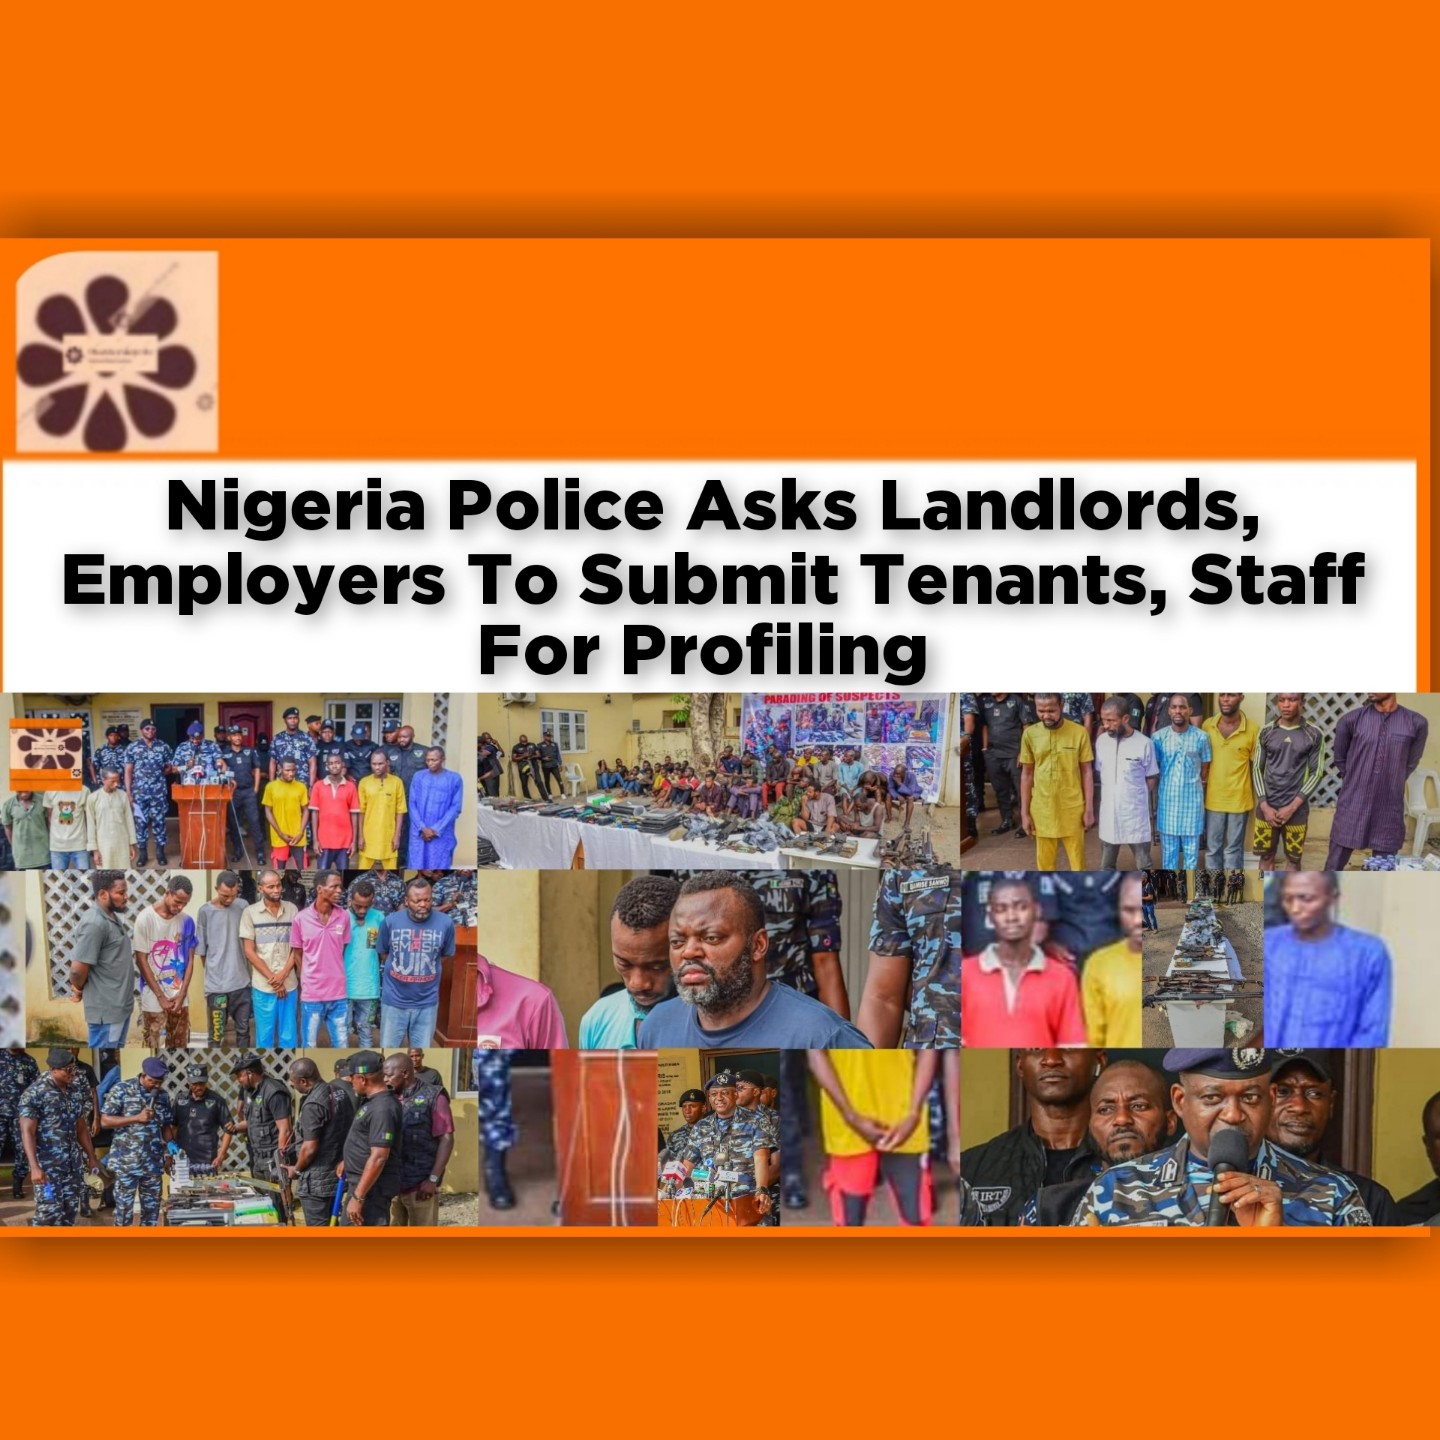 Nigeria Police Asks Landlords, Employers To Submit Tenants, Staff For Profiling ~ OsazuwaAkonedo #Sowore